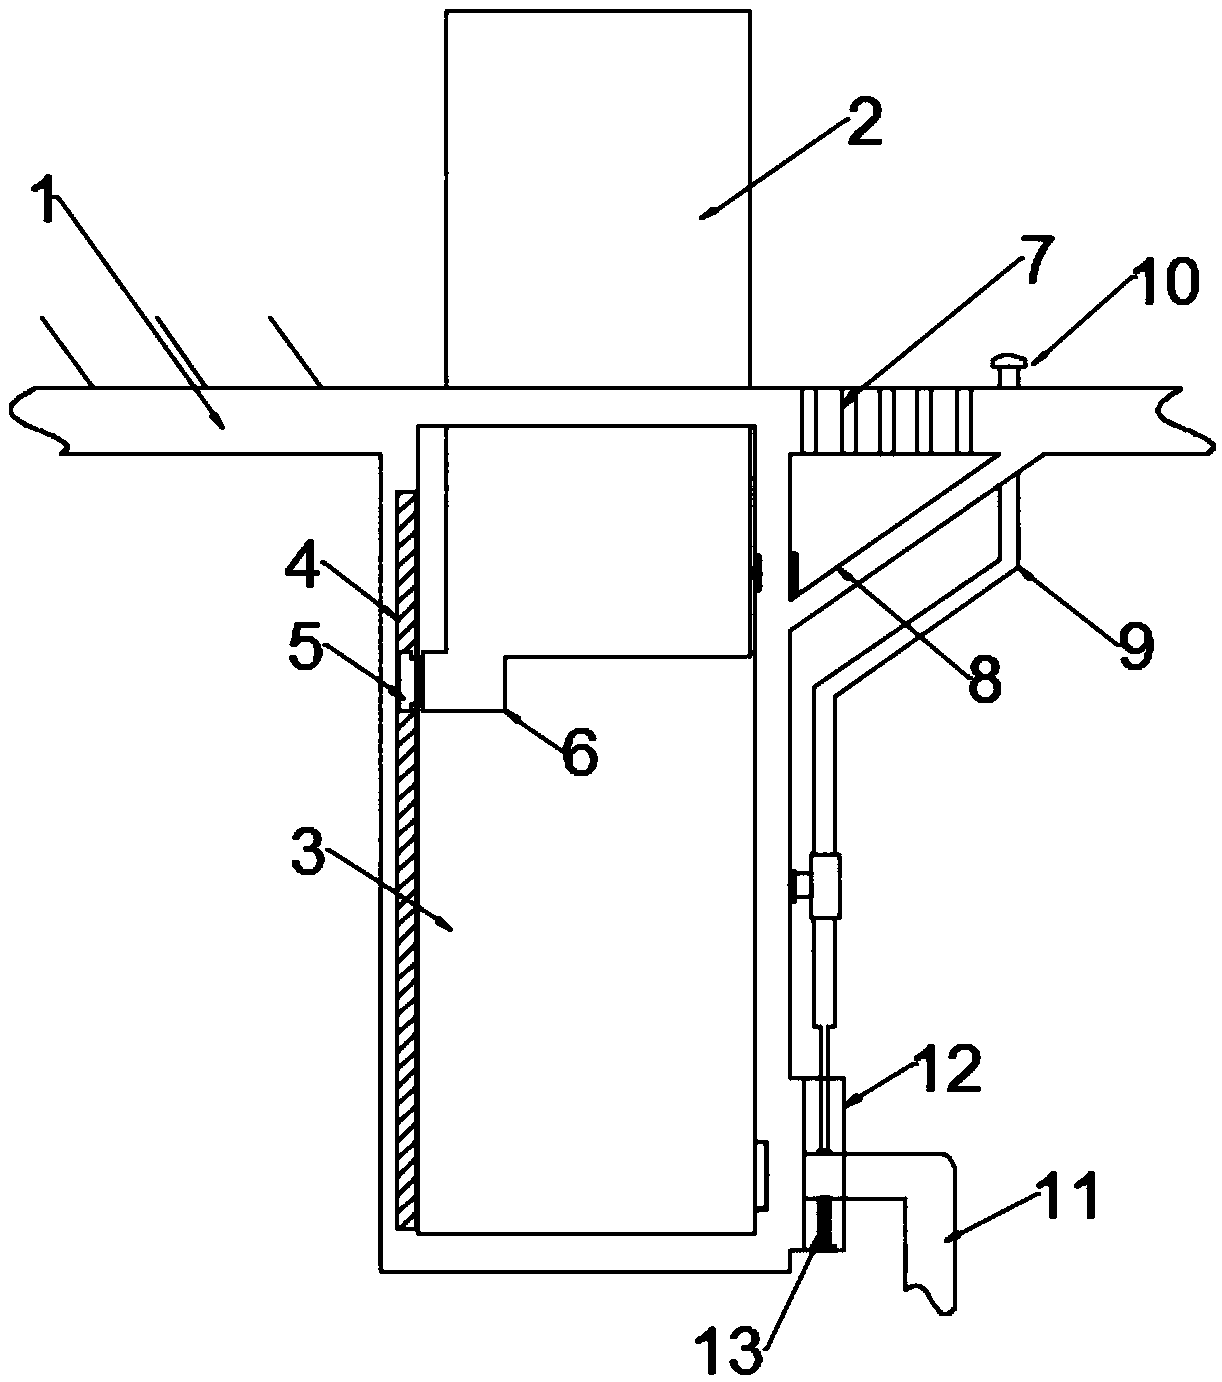 Ground dryness and wetness separation device based on buoyancy principle for toilet